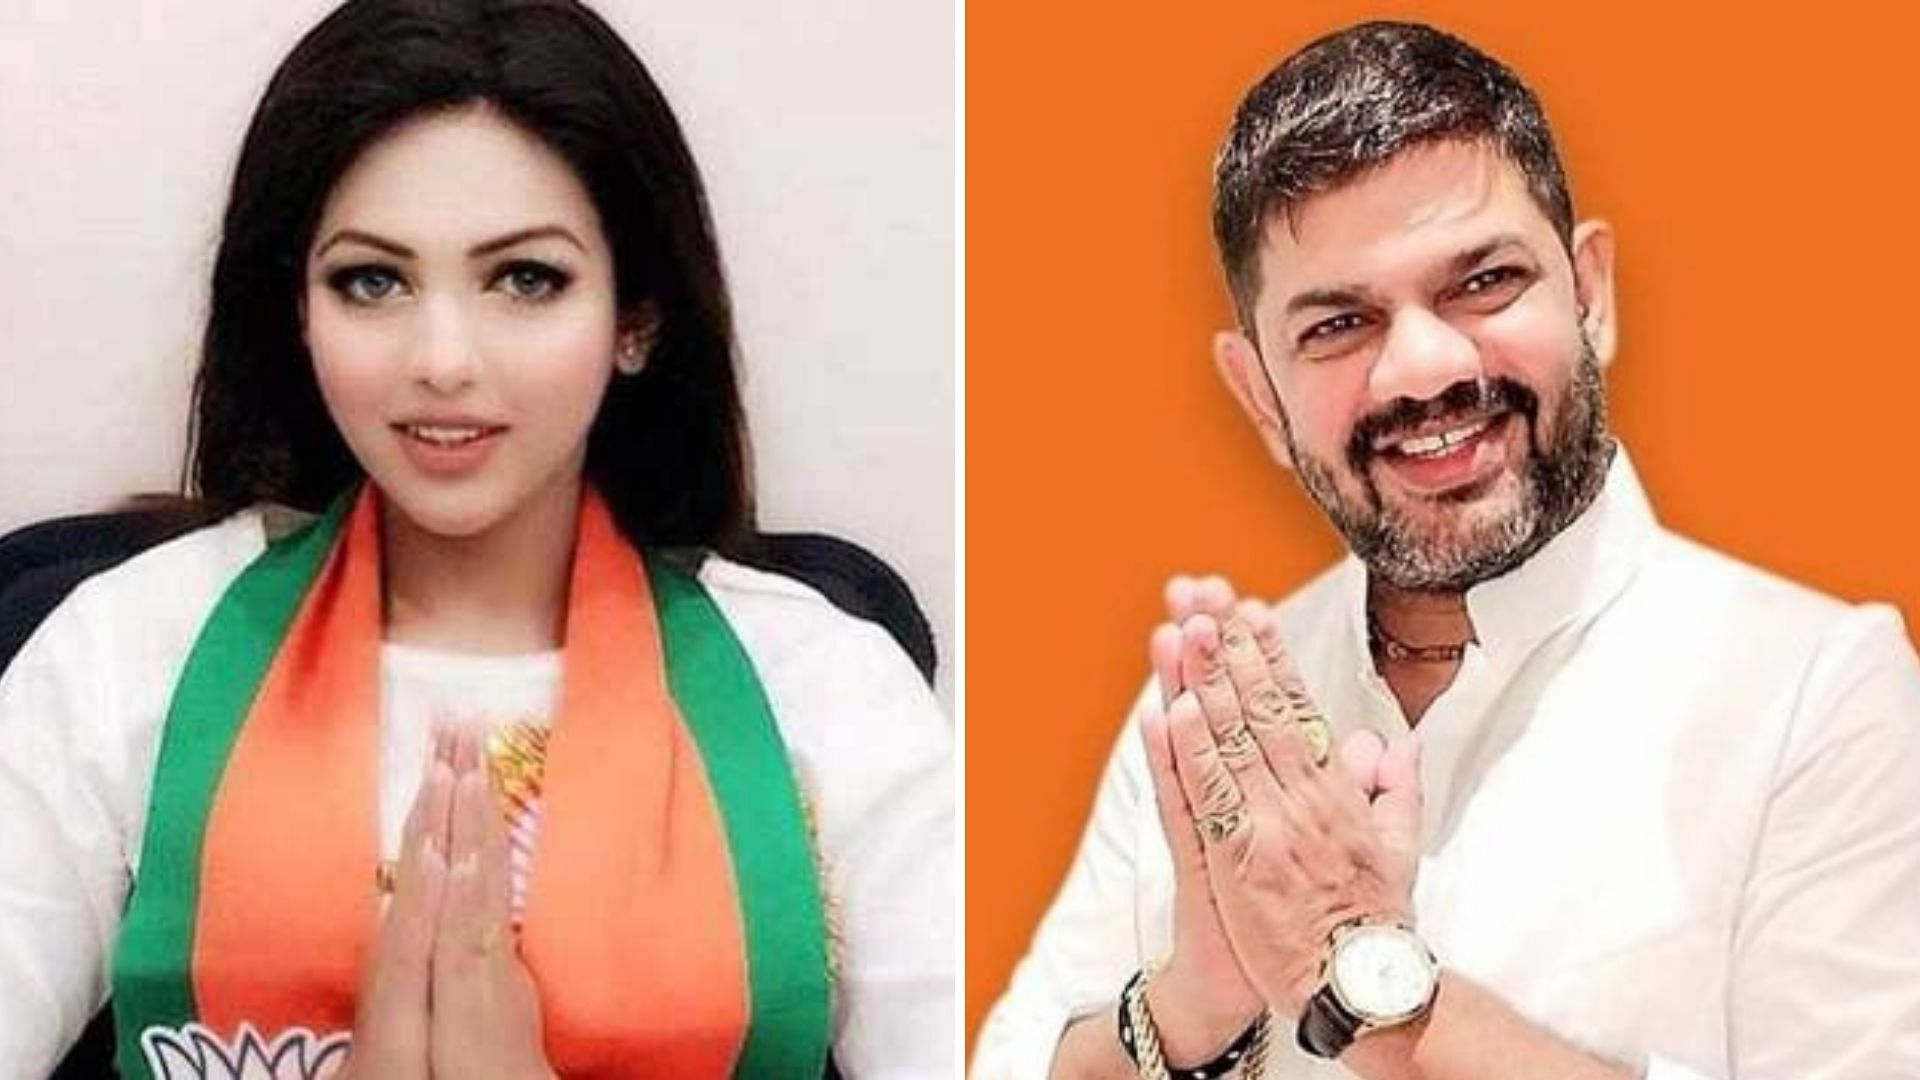 BJYM leader Pamela Goswami was arrested with 100gm of cocaine after which she accused Singh of conspiracy.